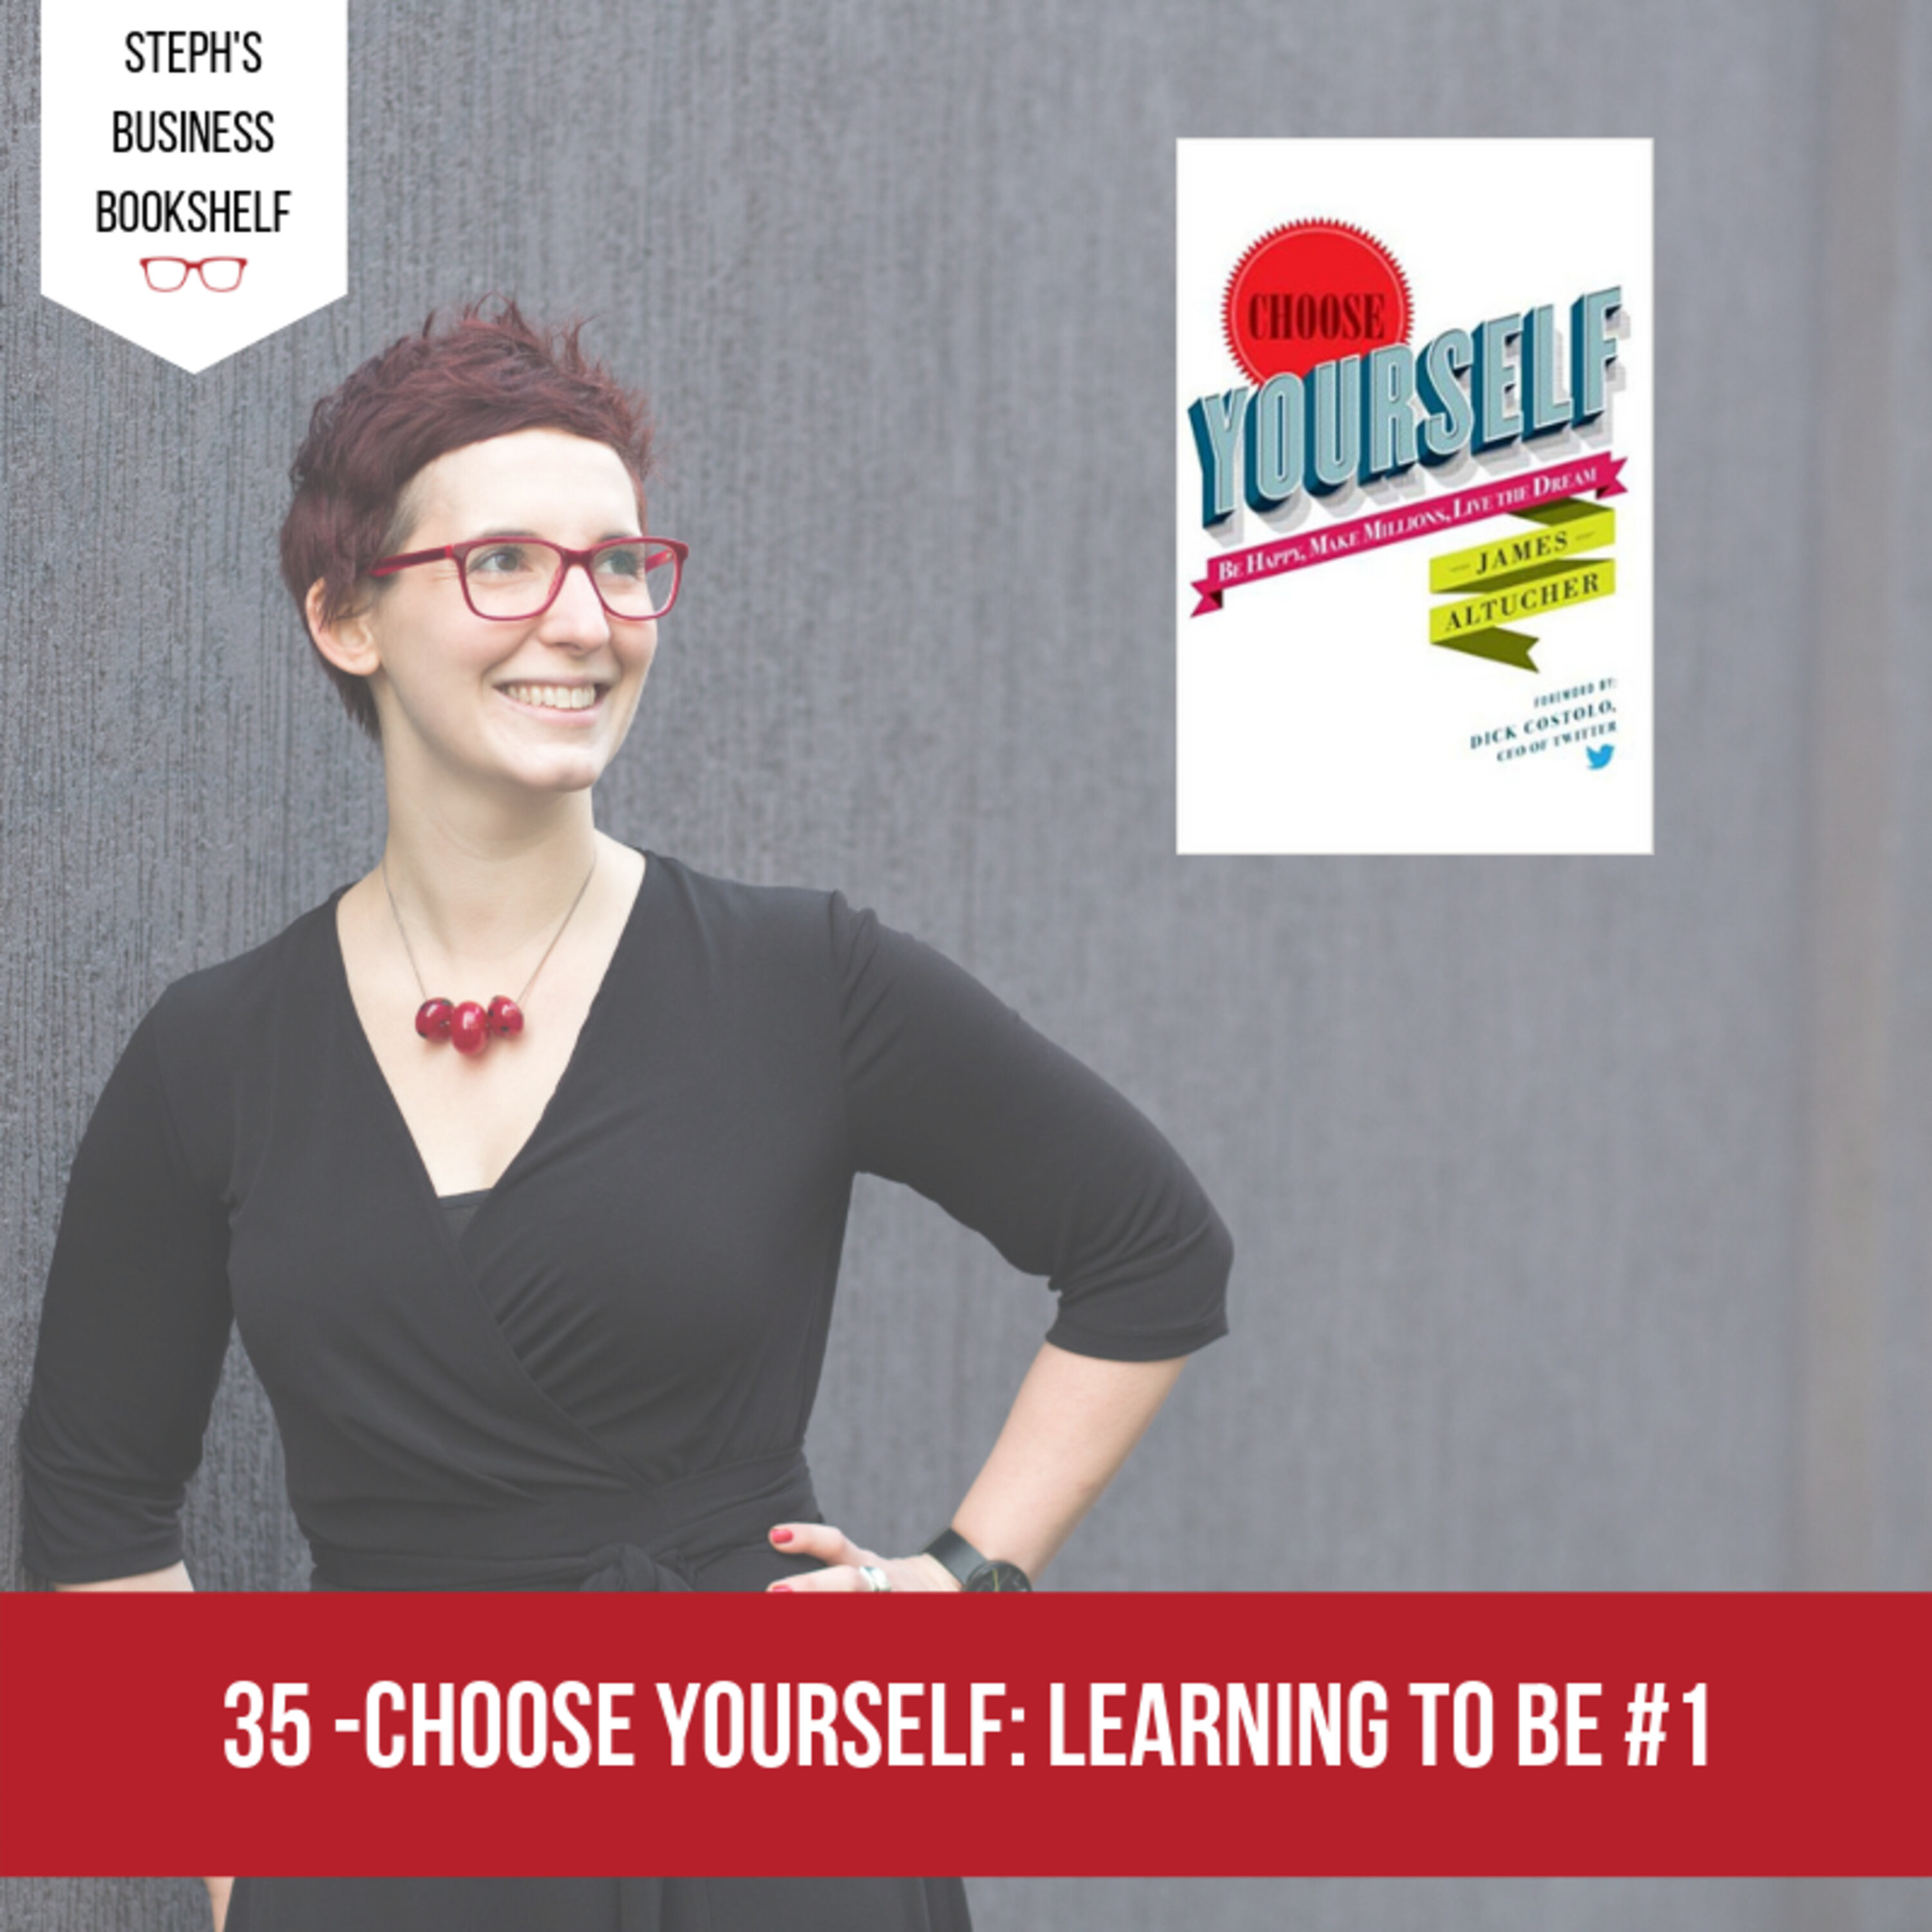 Choose Yourself by James Altucher: Learning to be #1